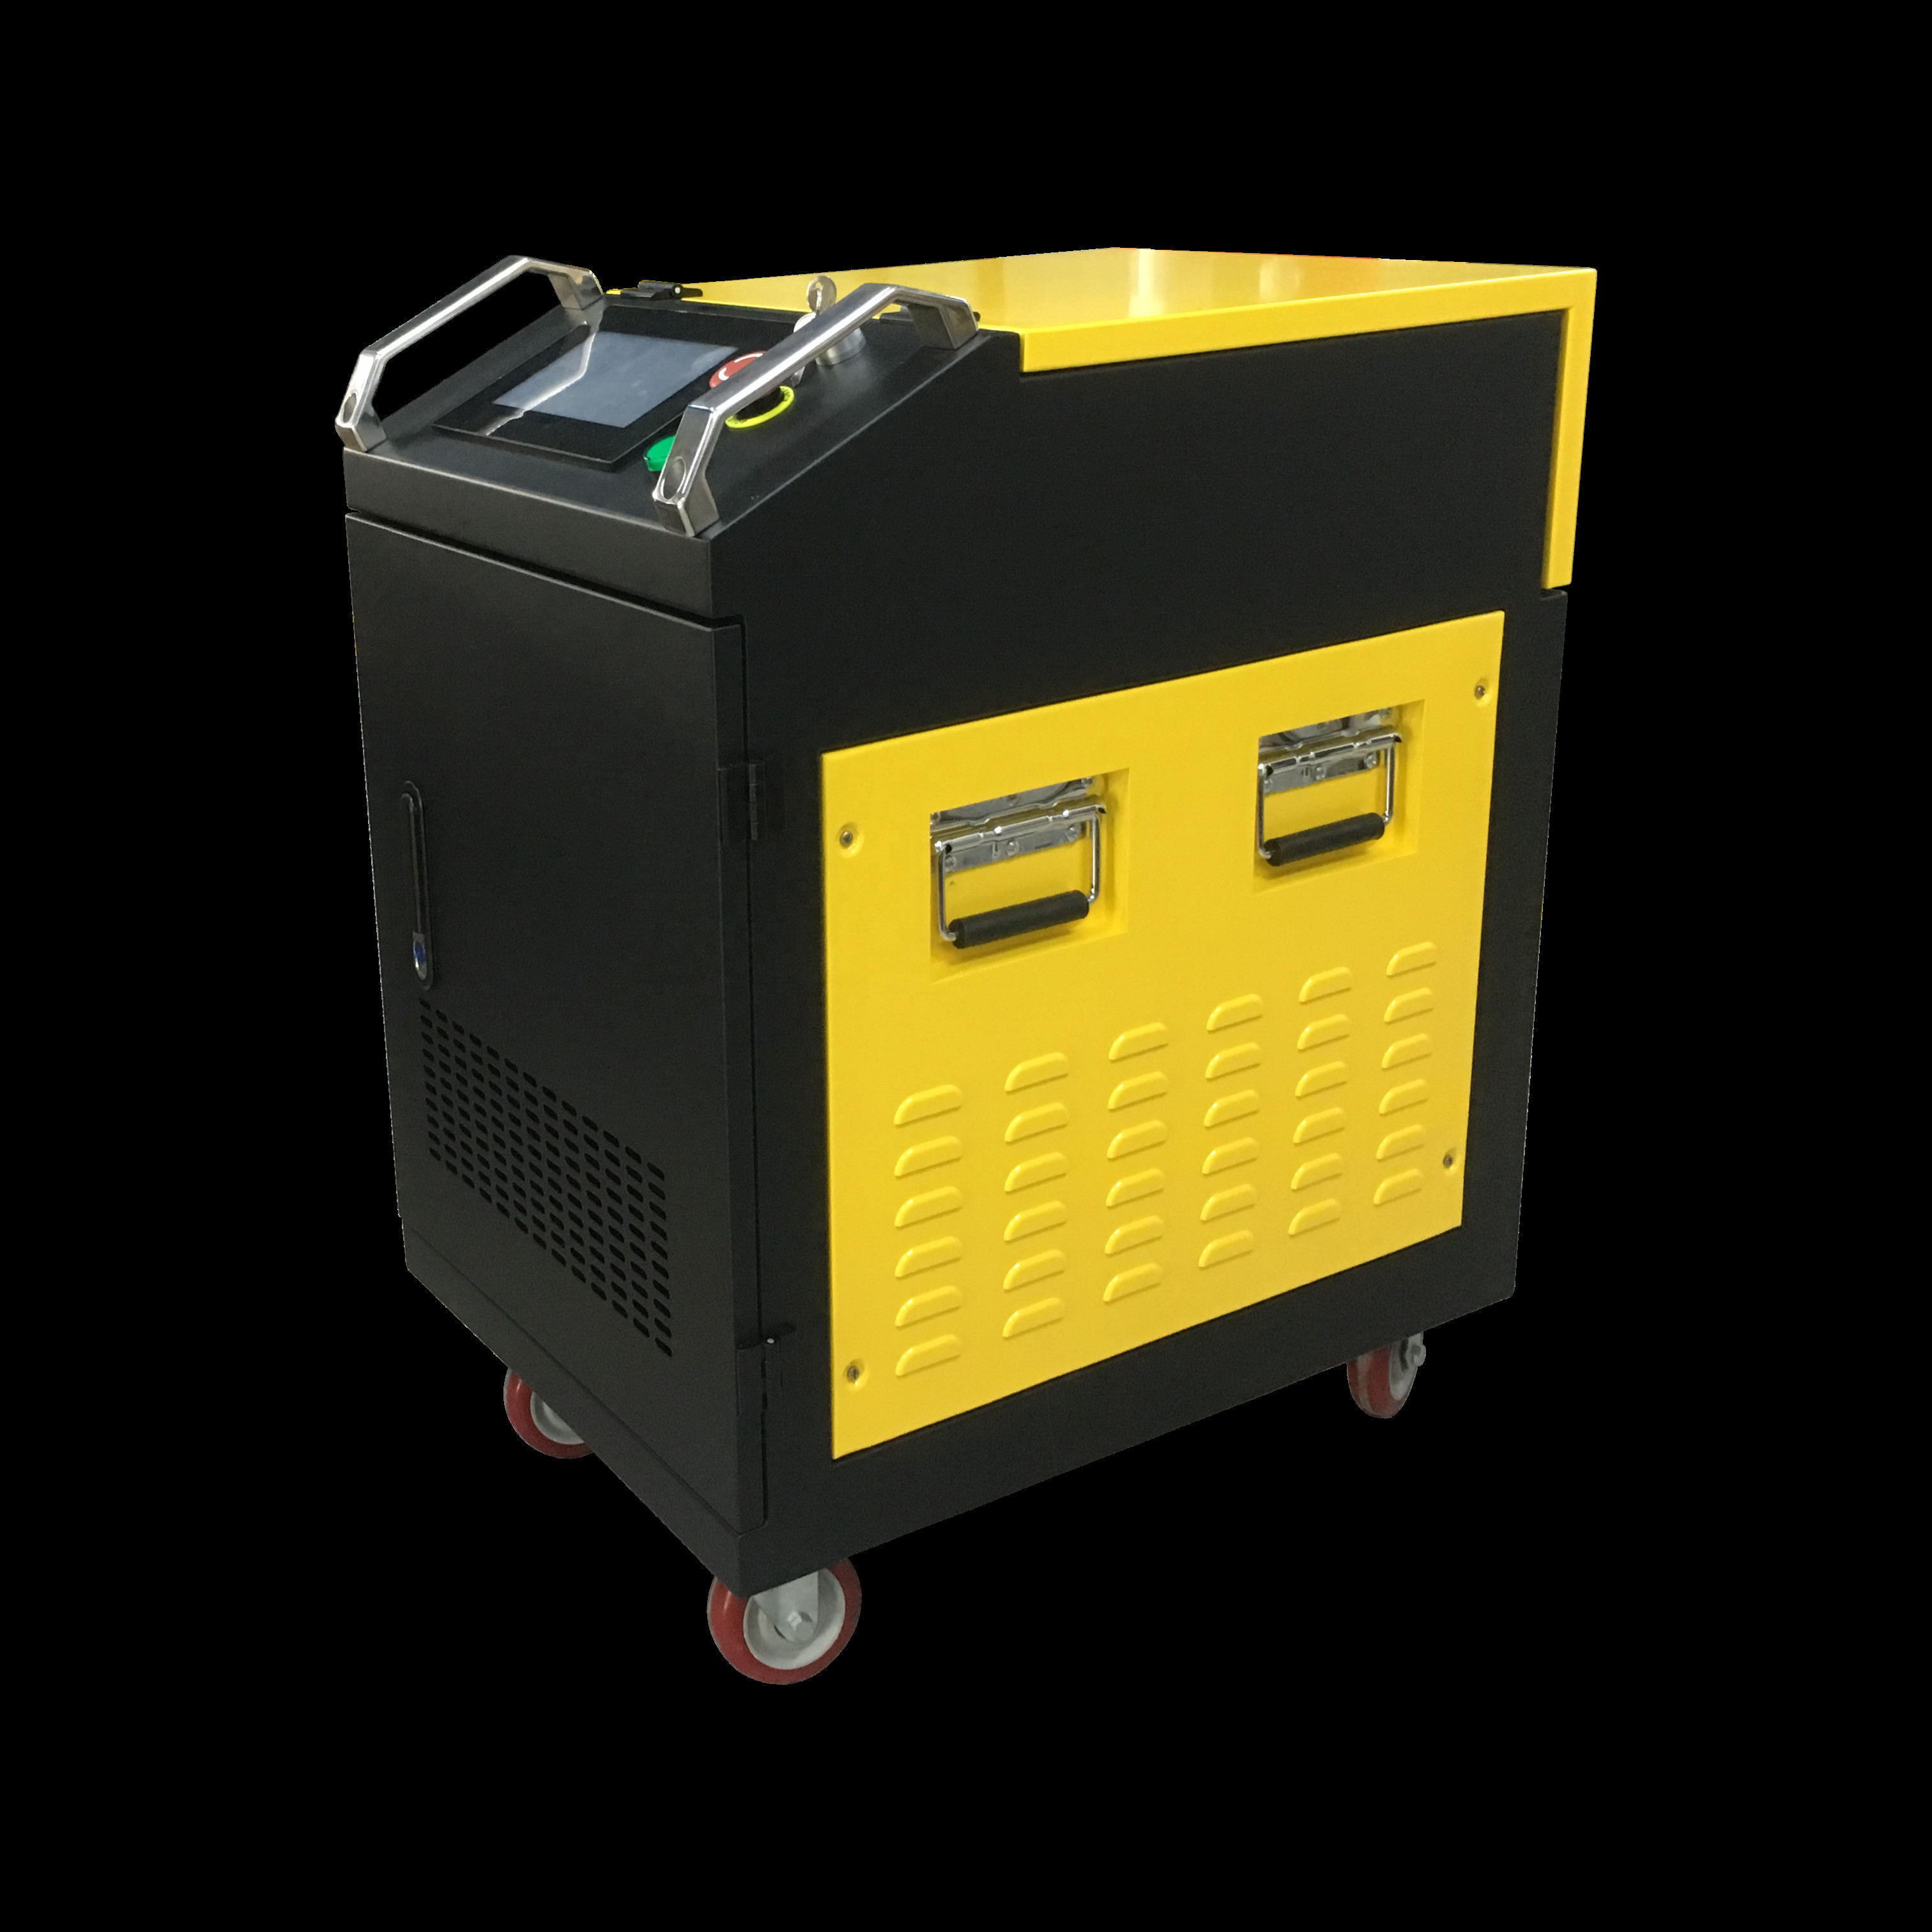  100W Rust Cleaning Laser Machine For Descaling / Stripping CE FDA Certification Manufactures